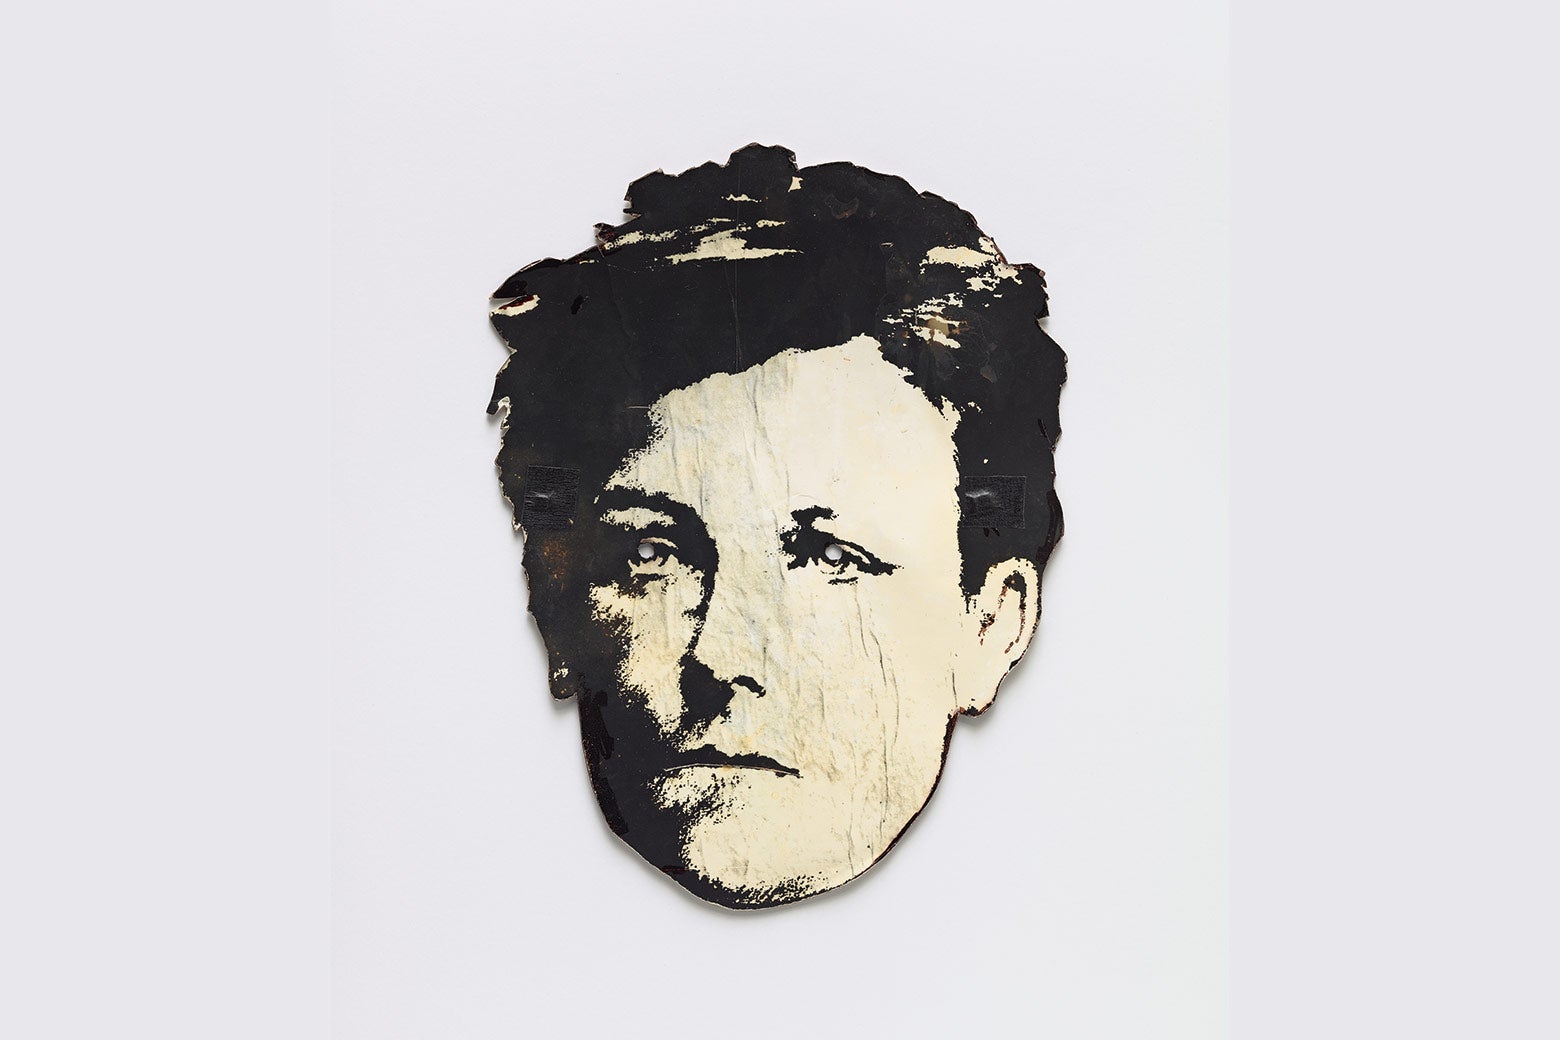 A mask of Rimbaud's face.